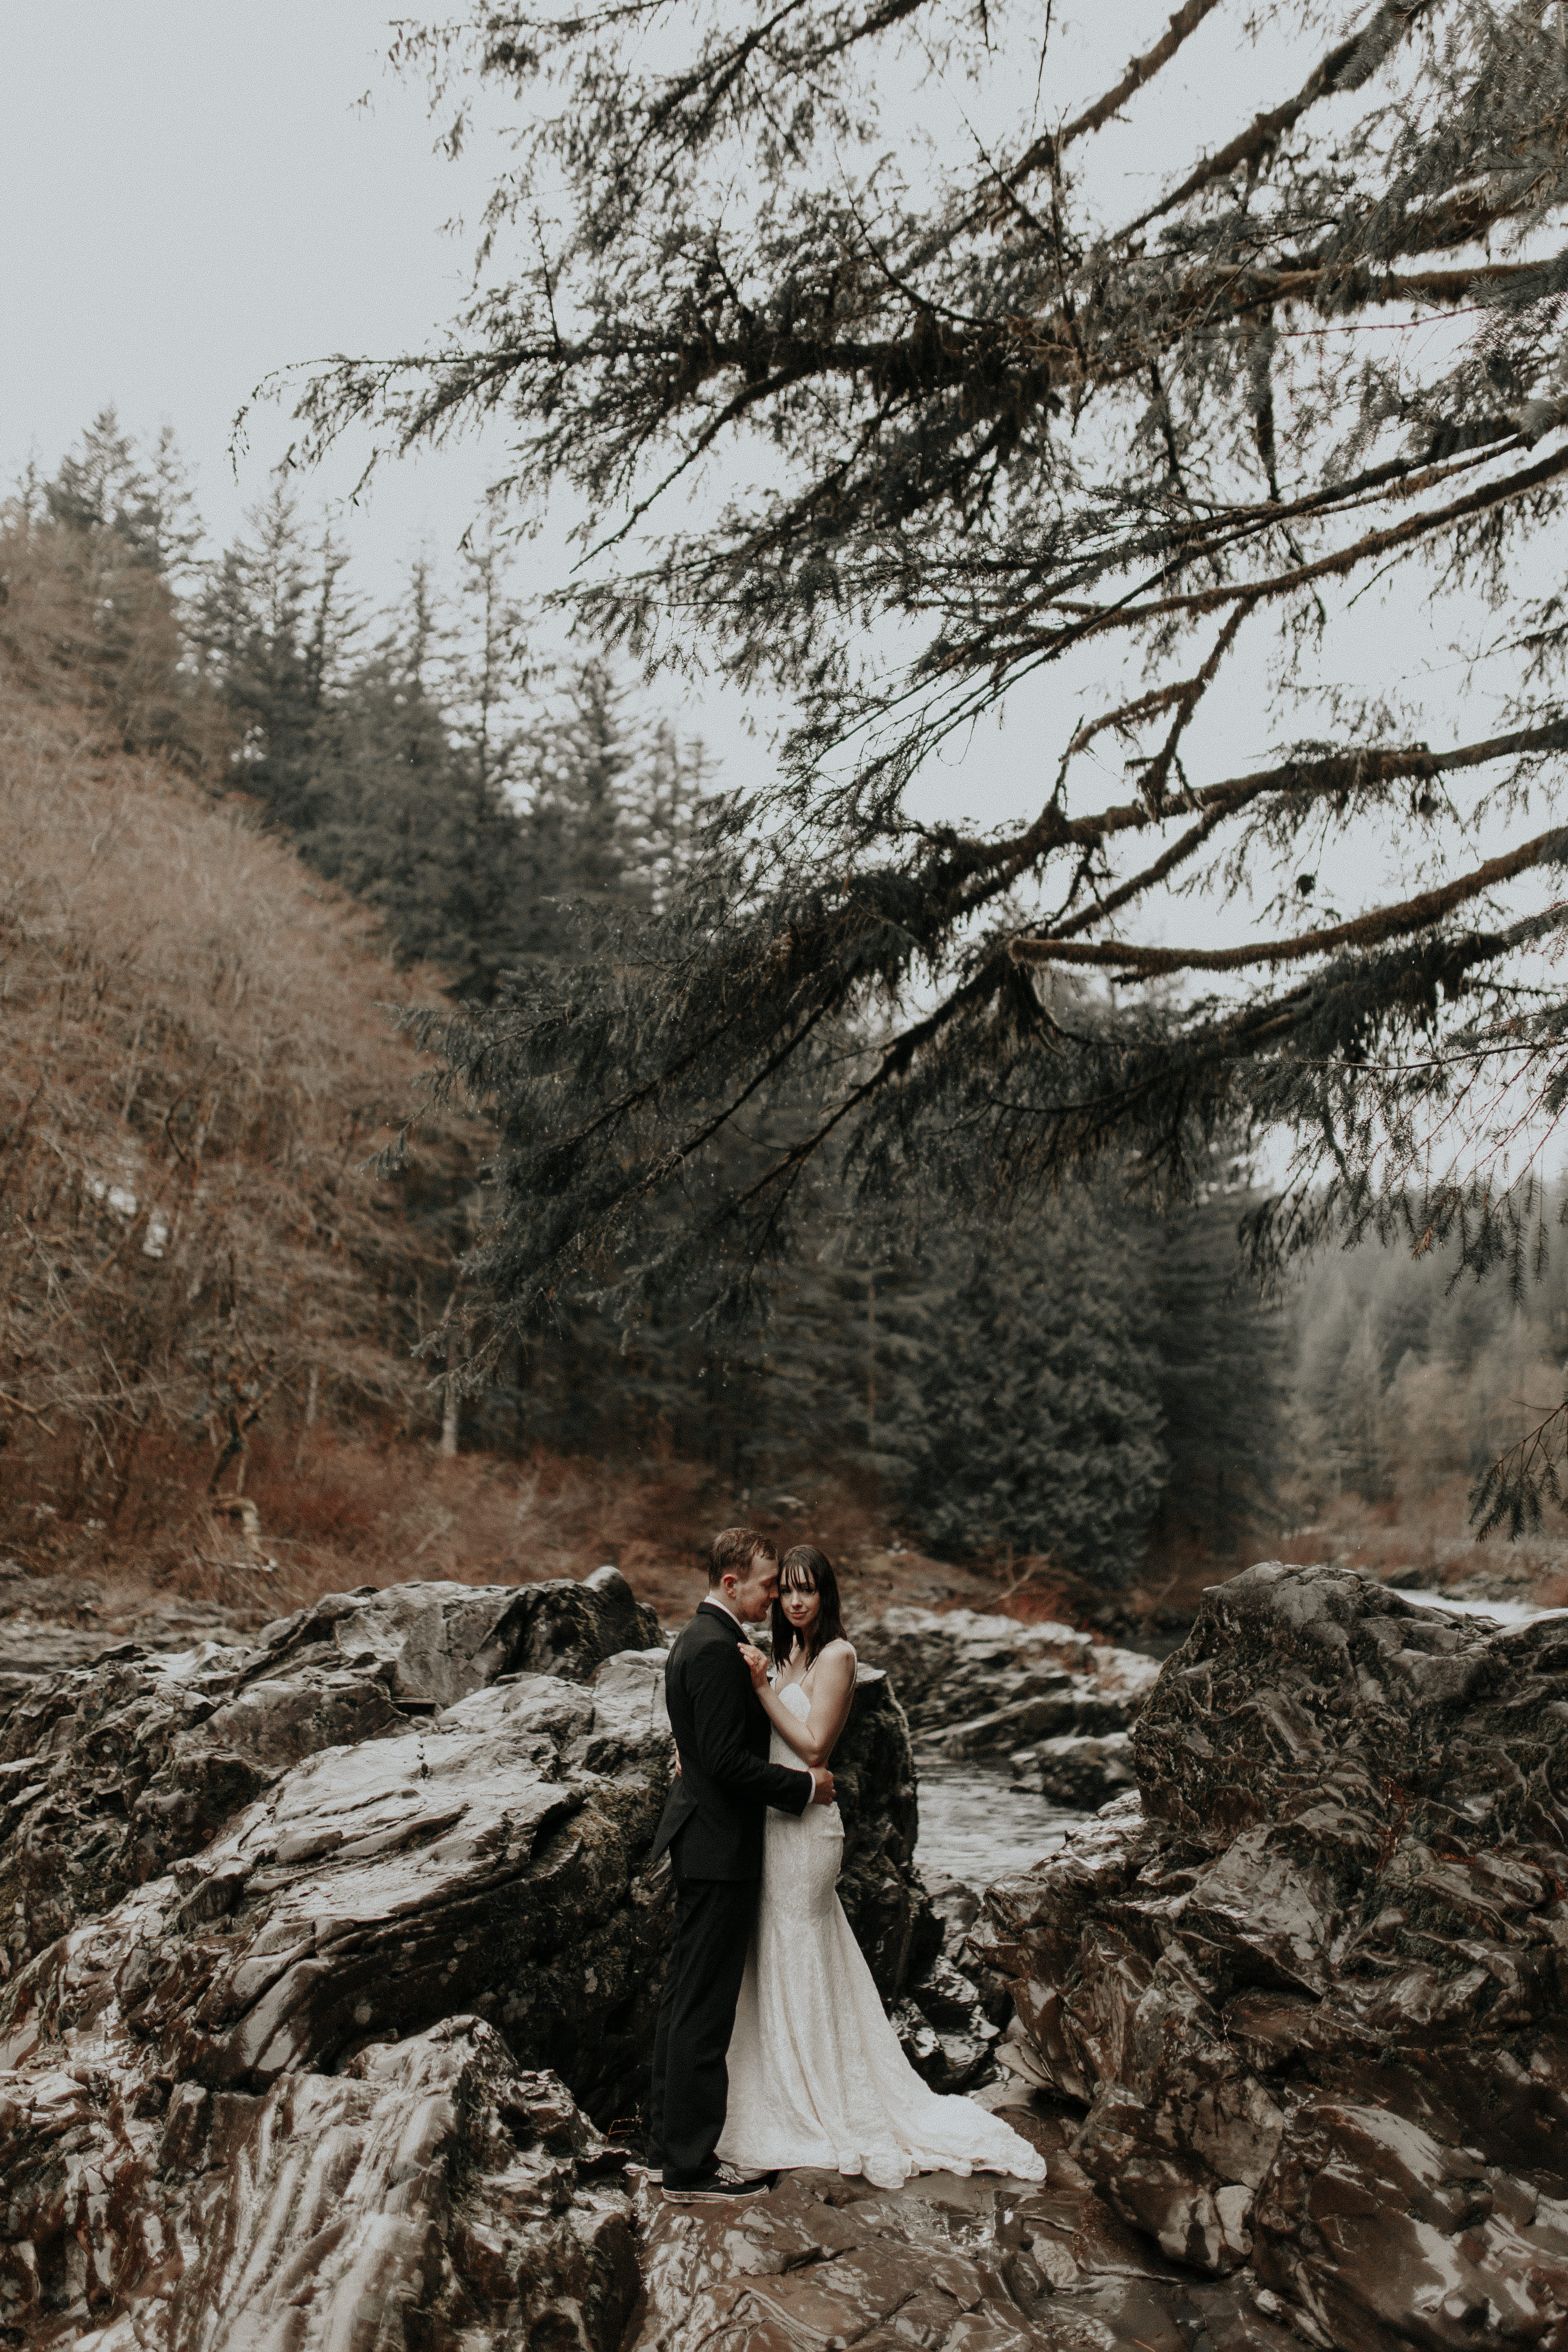 TJ and Paige standing on the boulders on the river of Moulton Falls for their adventure elopement wedding in Washington.